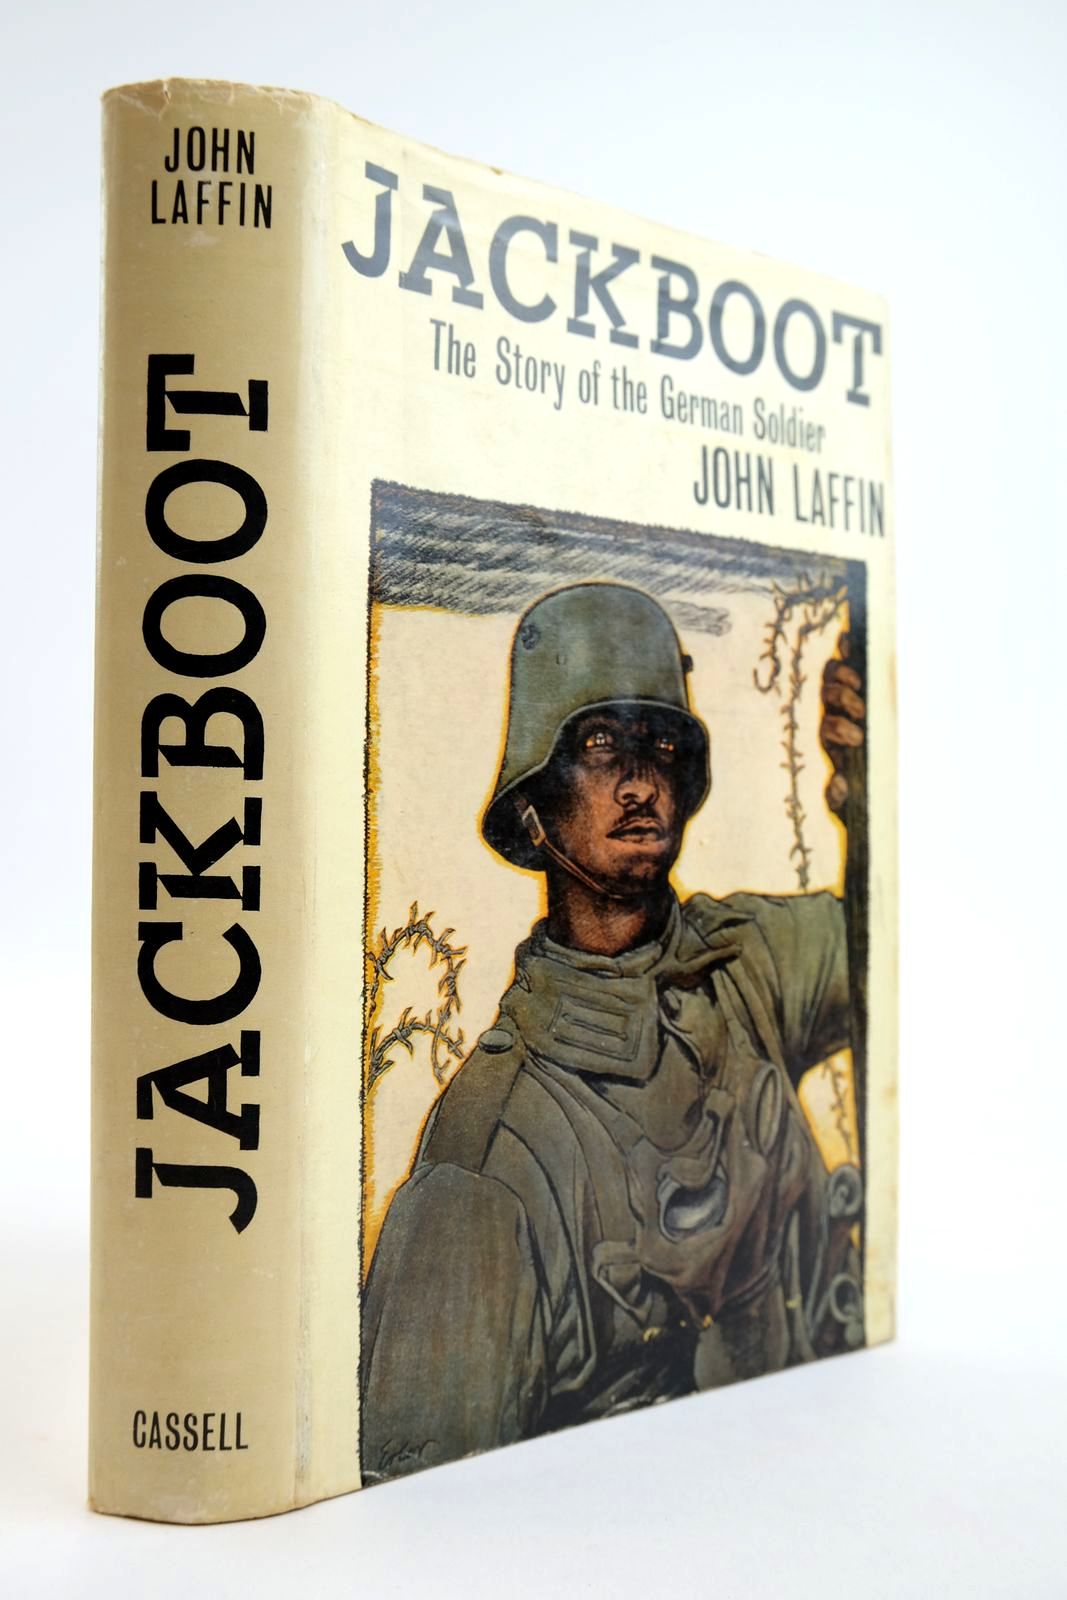 Photo of JACKBOOT: THE STORY OF THE GERMAN SOLDIER written by Laffin, John published by Cassell (STOCK CODE: 2134018)  for sale by Stella & Rose's Books